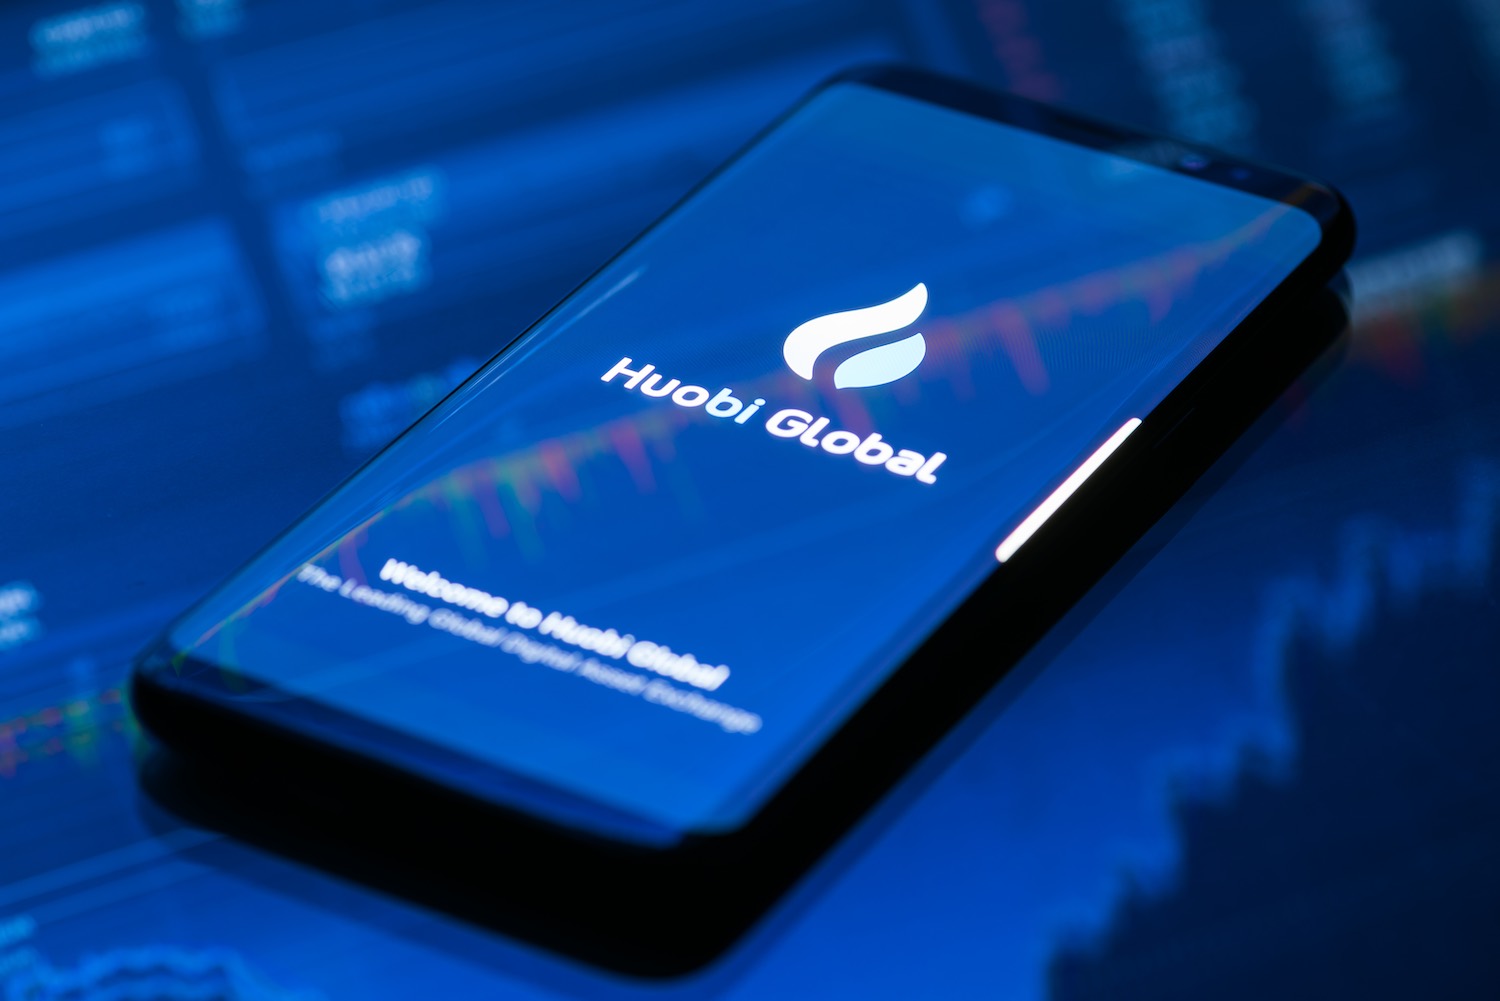 Huobi-Backed Whole Network Launches Low-Cost Blockchain Phone